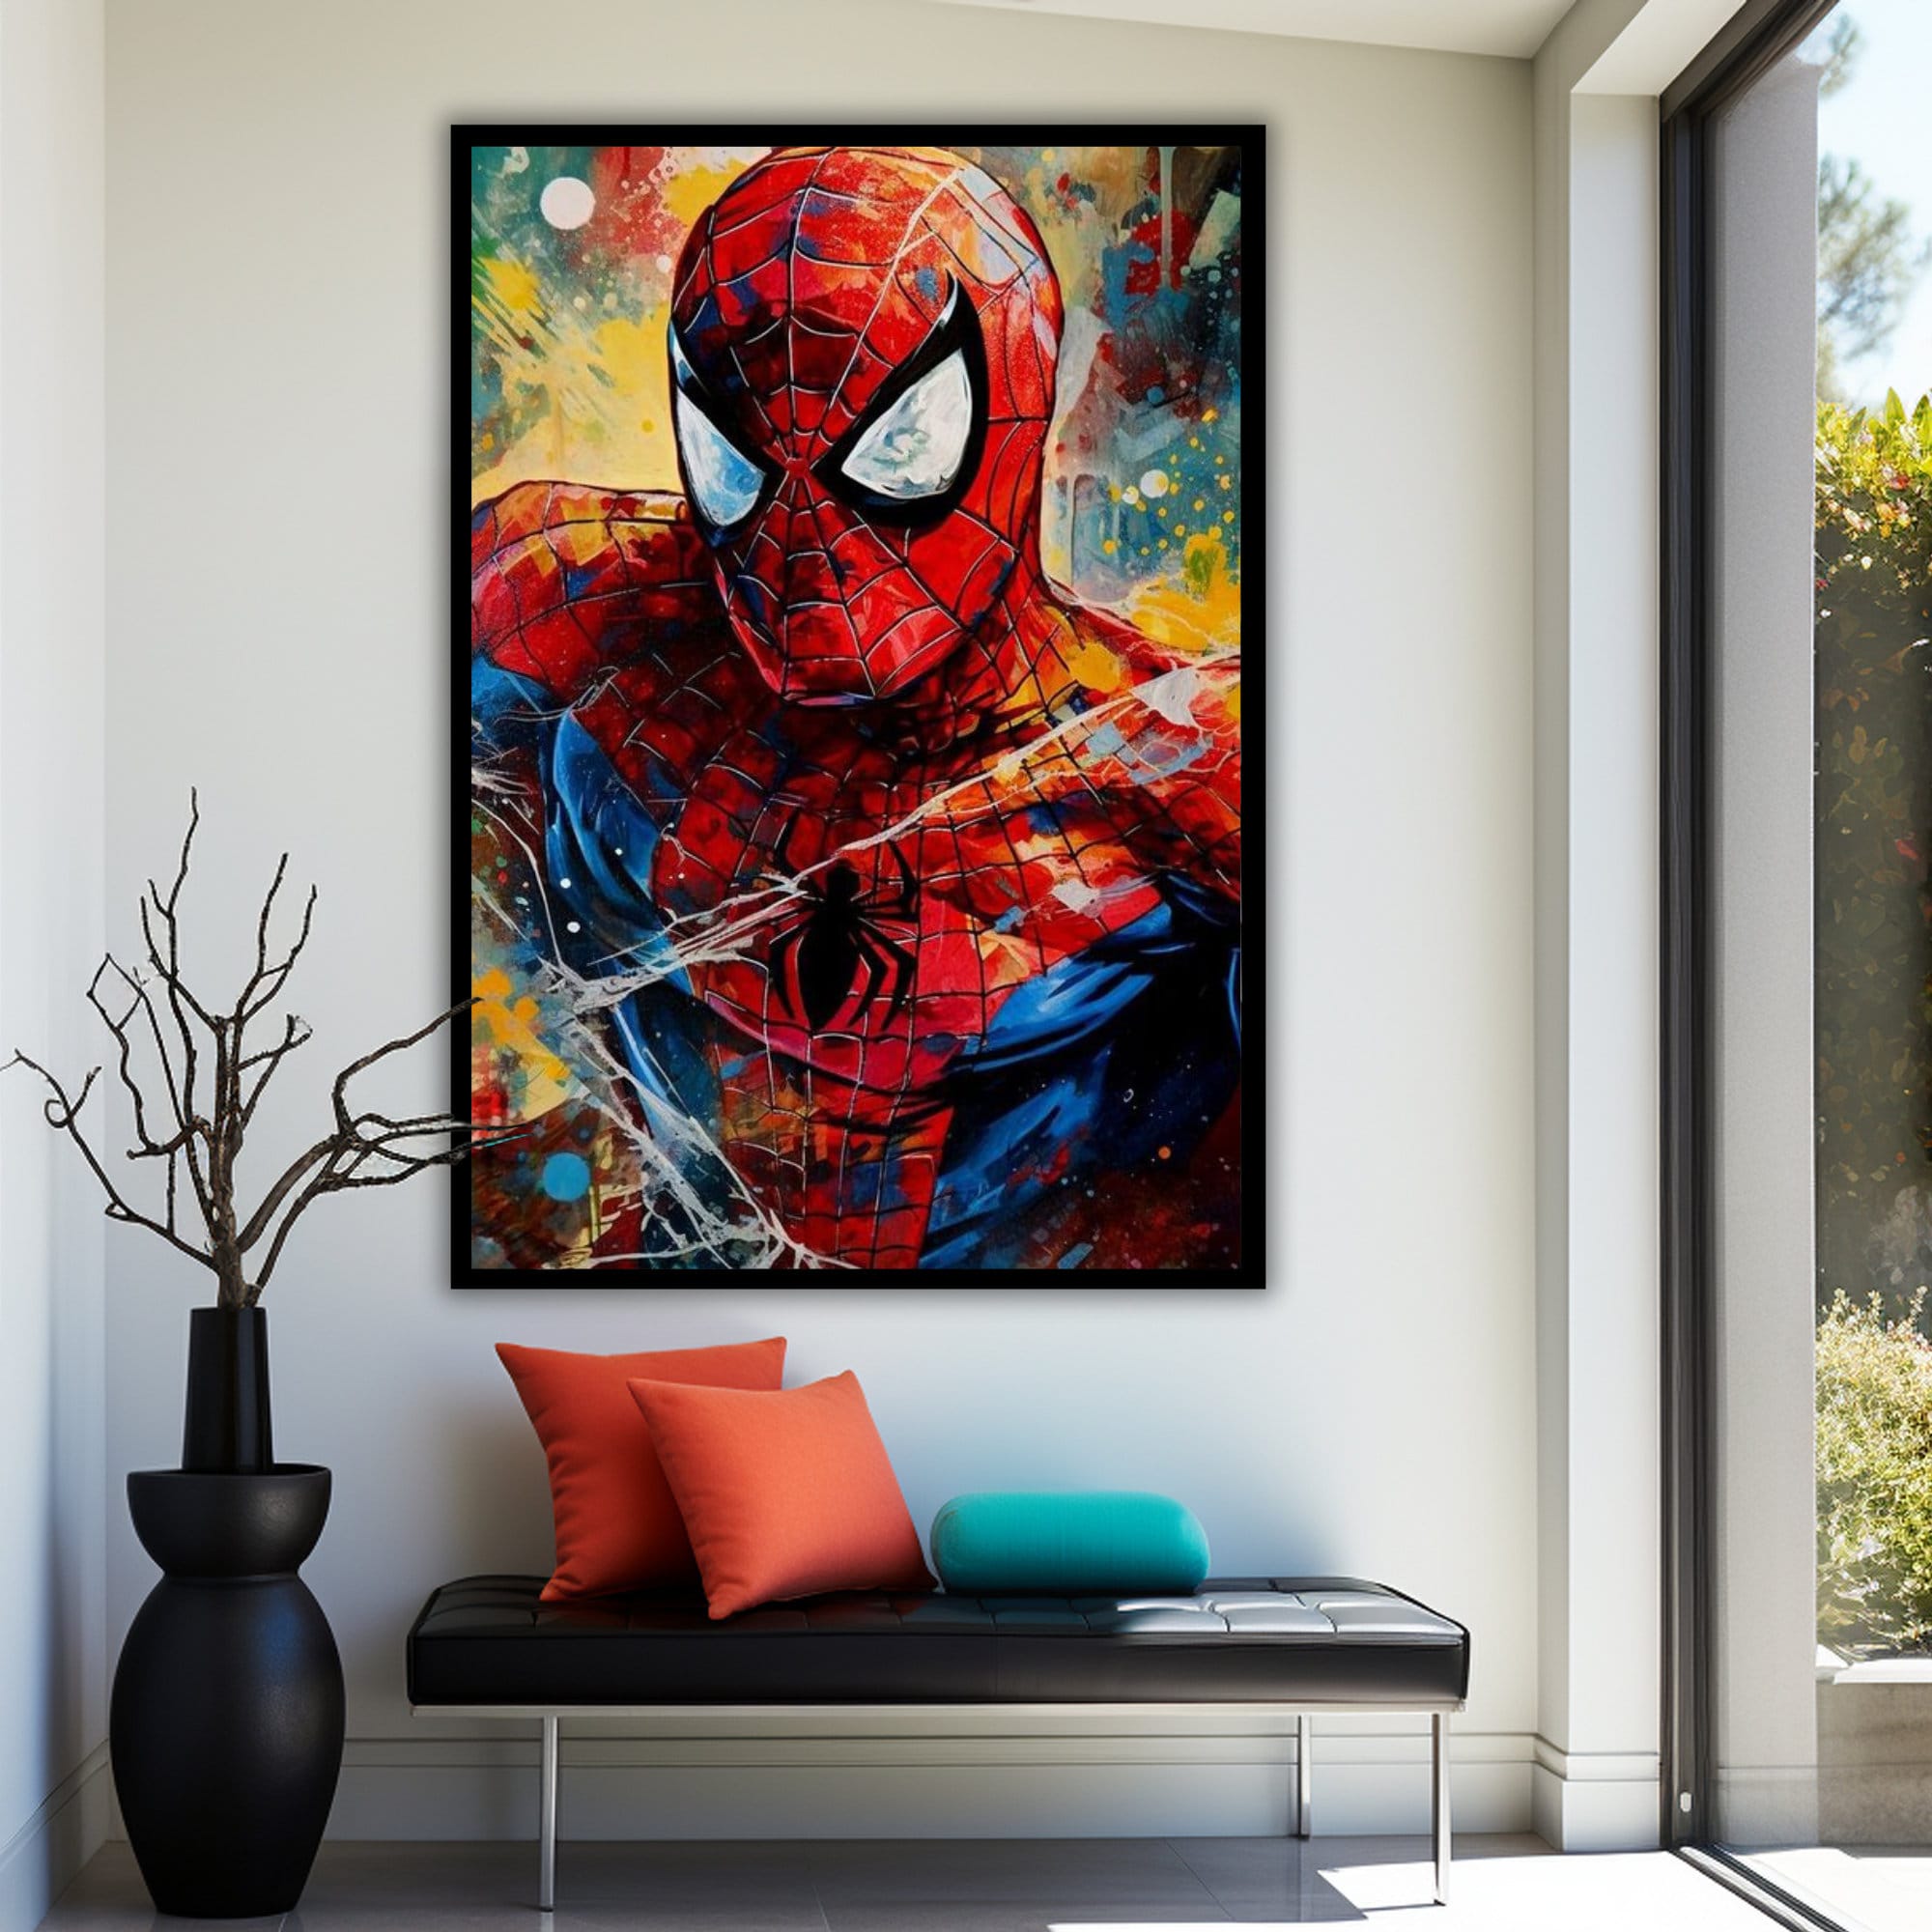 Discover Spiderman Movie Poster, Spiderman Poster